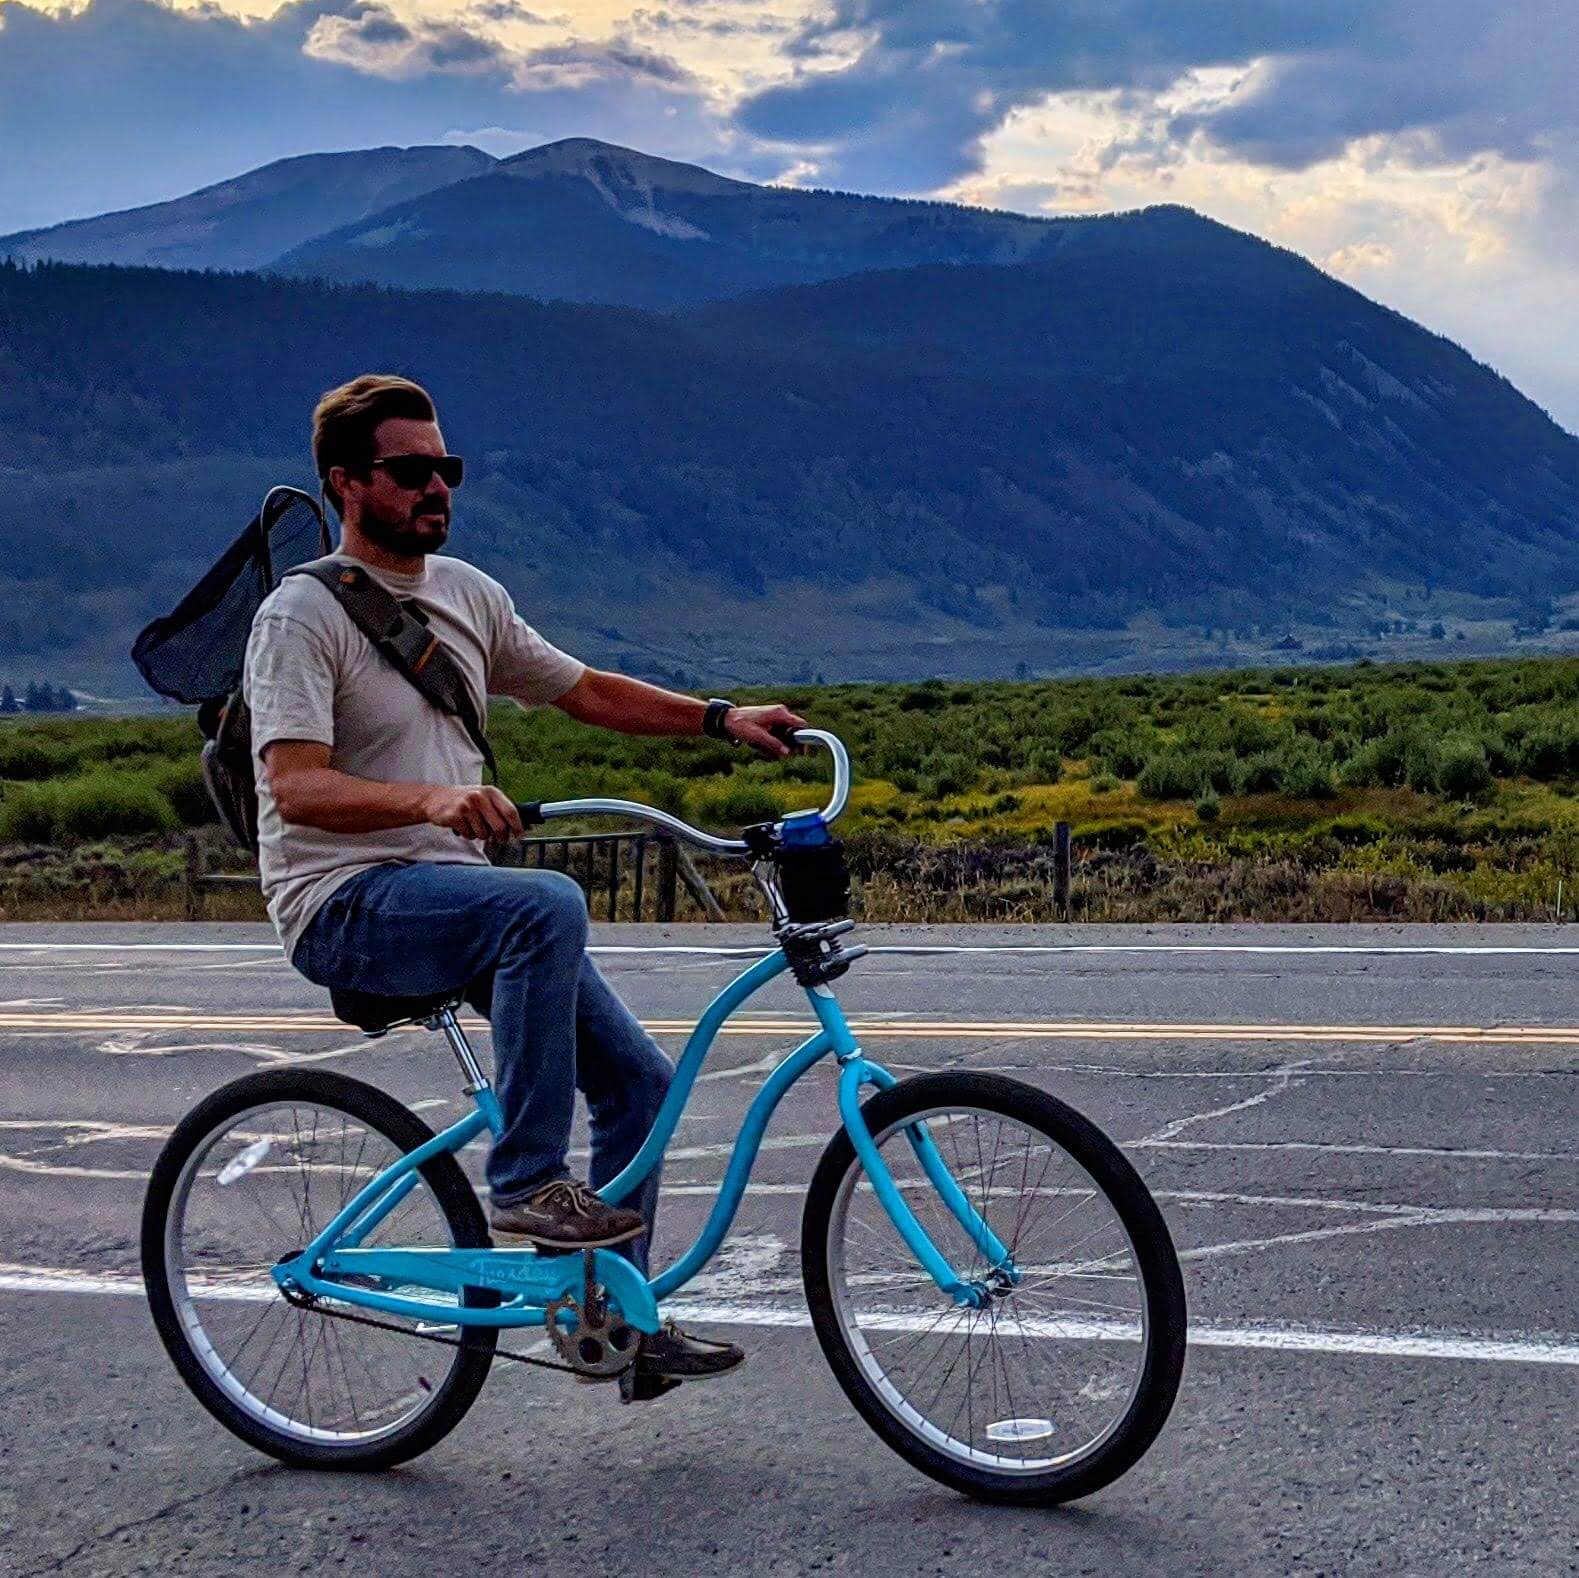 Cruiser bike with handlebar cup holder and mountain background